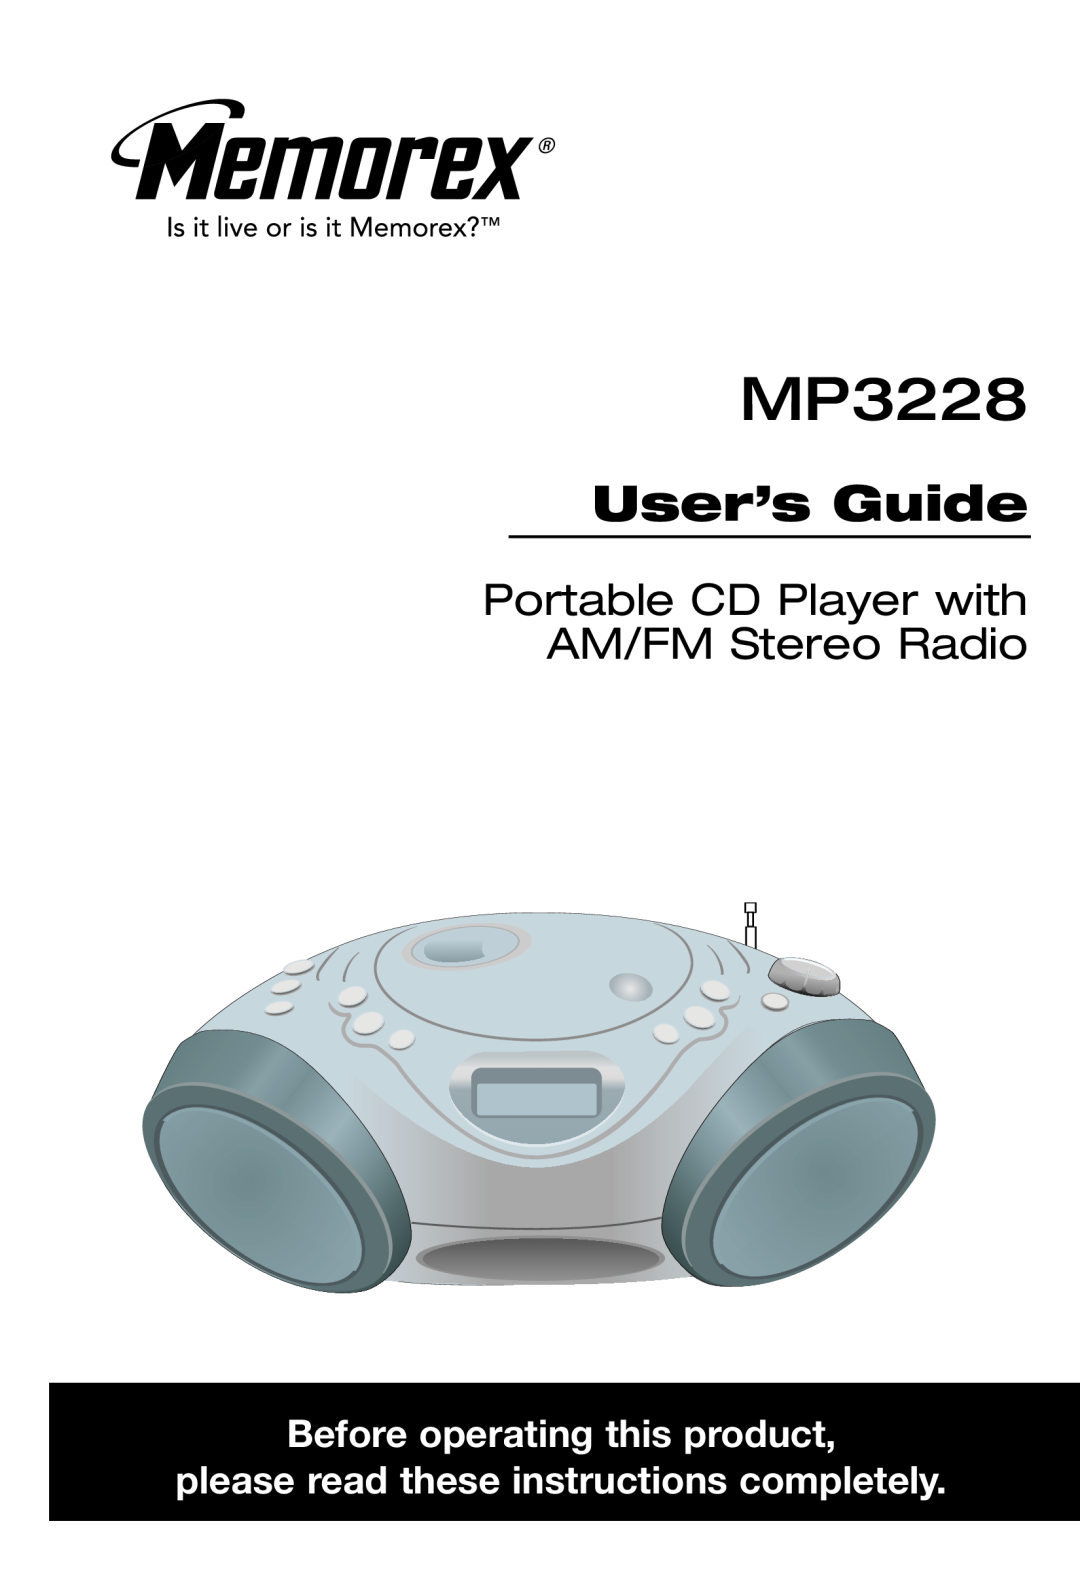 Memorex MP3228 manual User’s Guide, Portable CD Player with AM/FM Stereo Radio, Before operating this product 